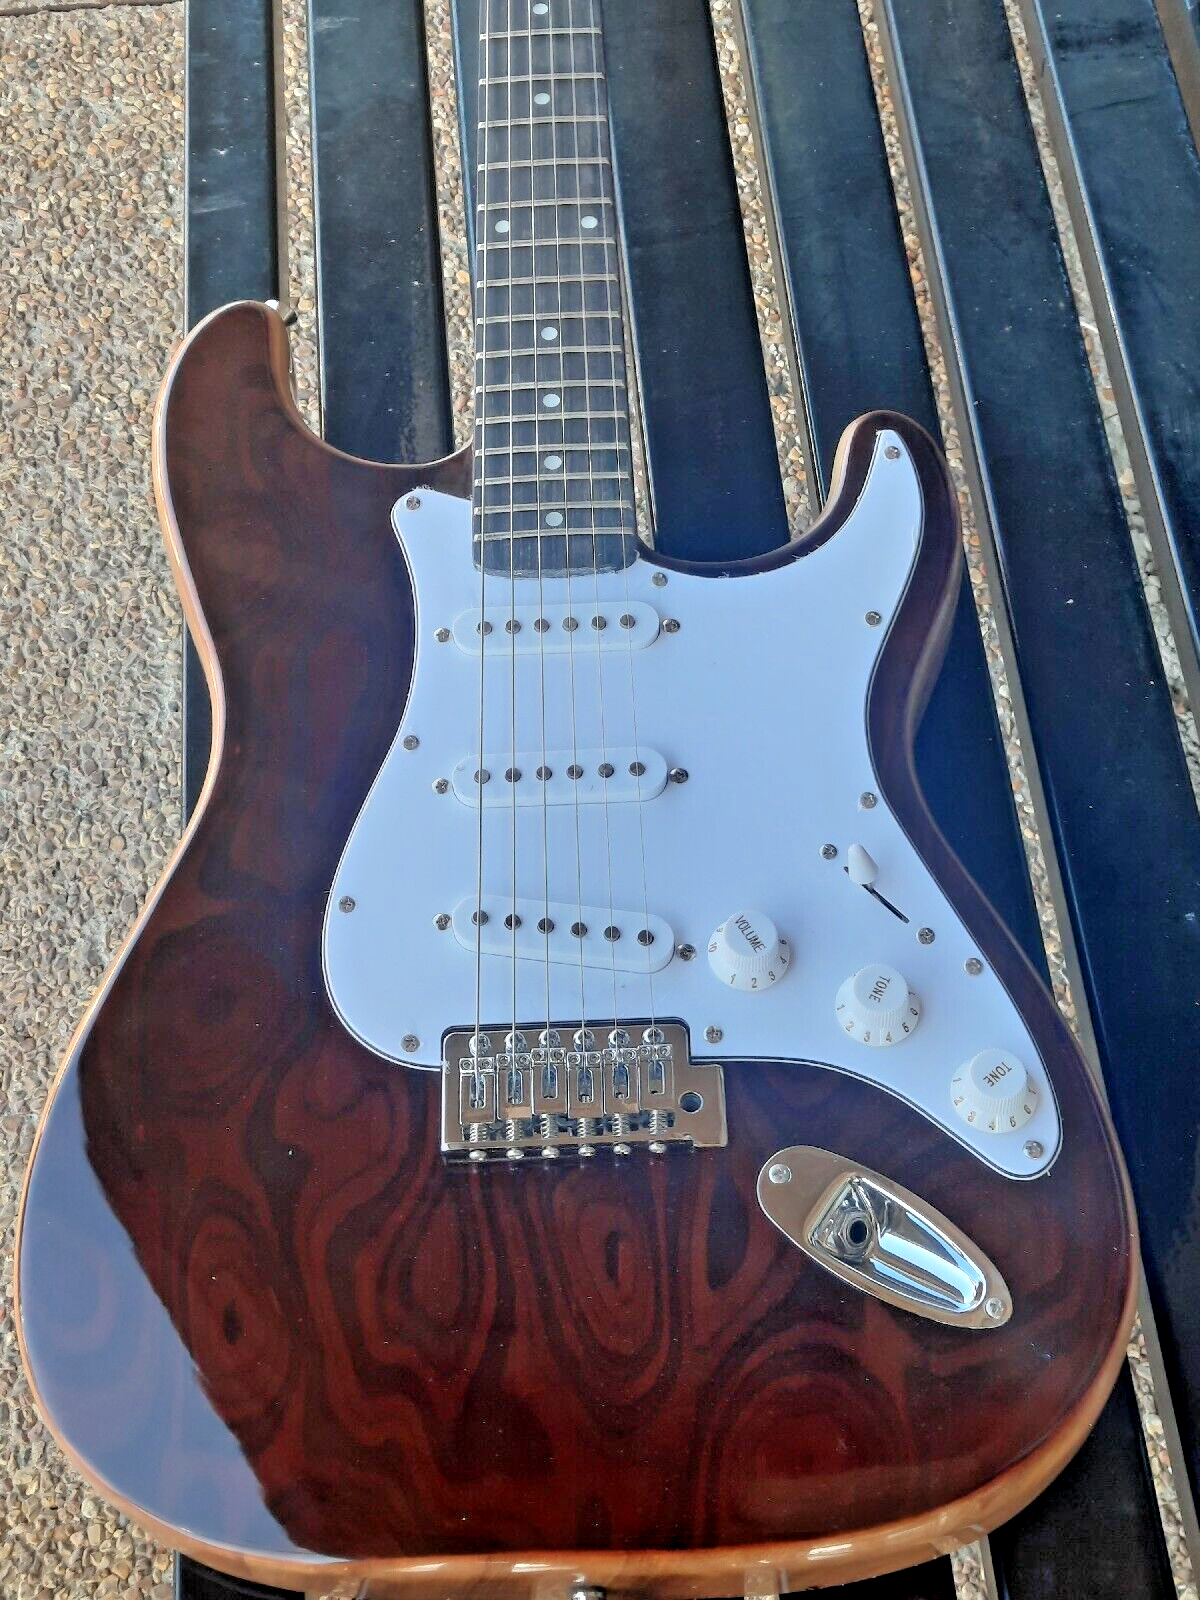  CUSTOM MADE NEW STRAT STYLE NATURAL CURLY BURL MAPLE 6 STRING ELECTRIC GUITAR | eBay